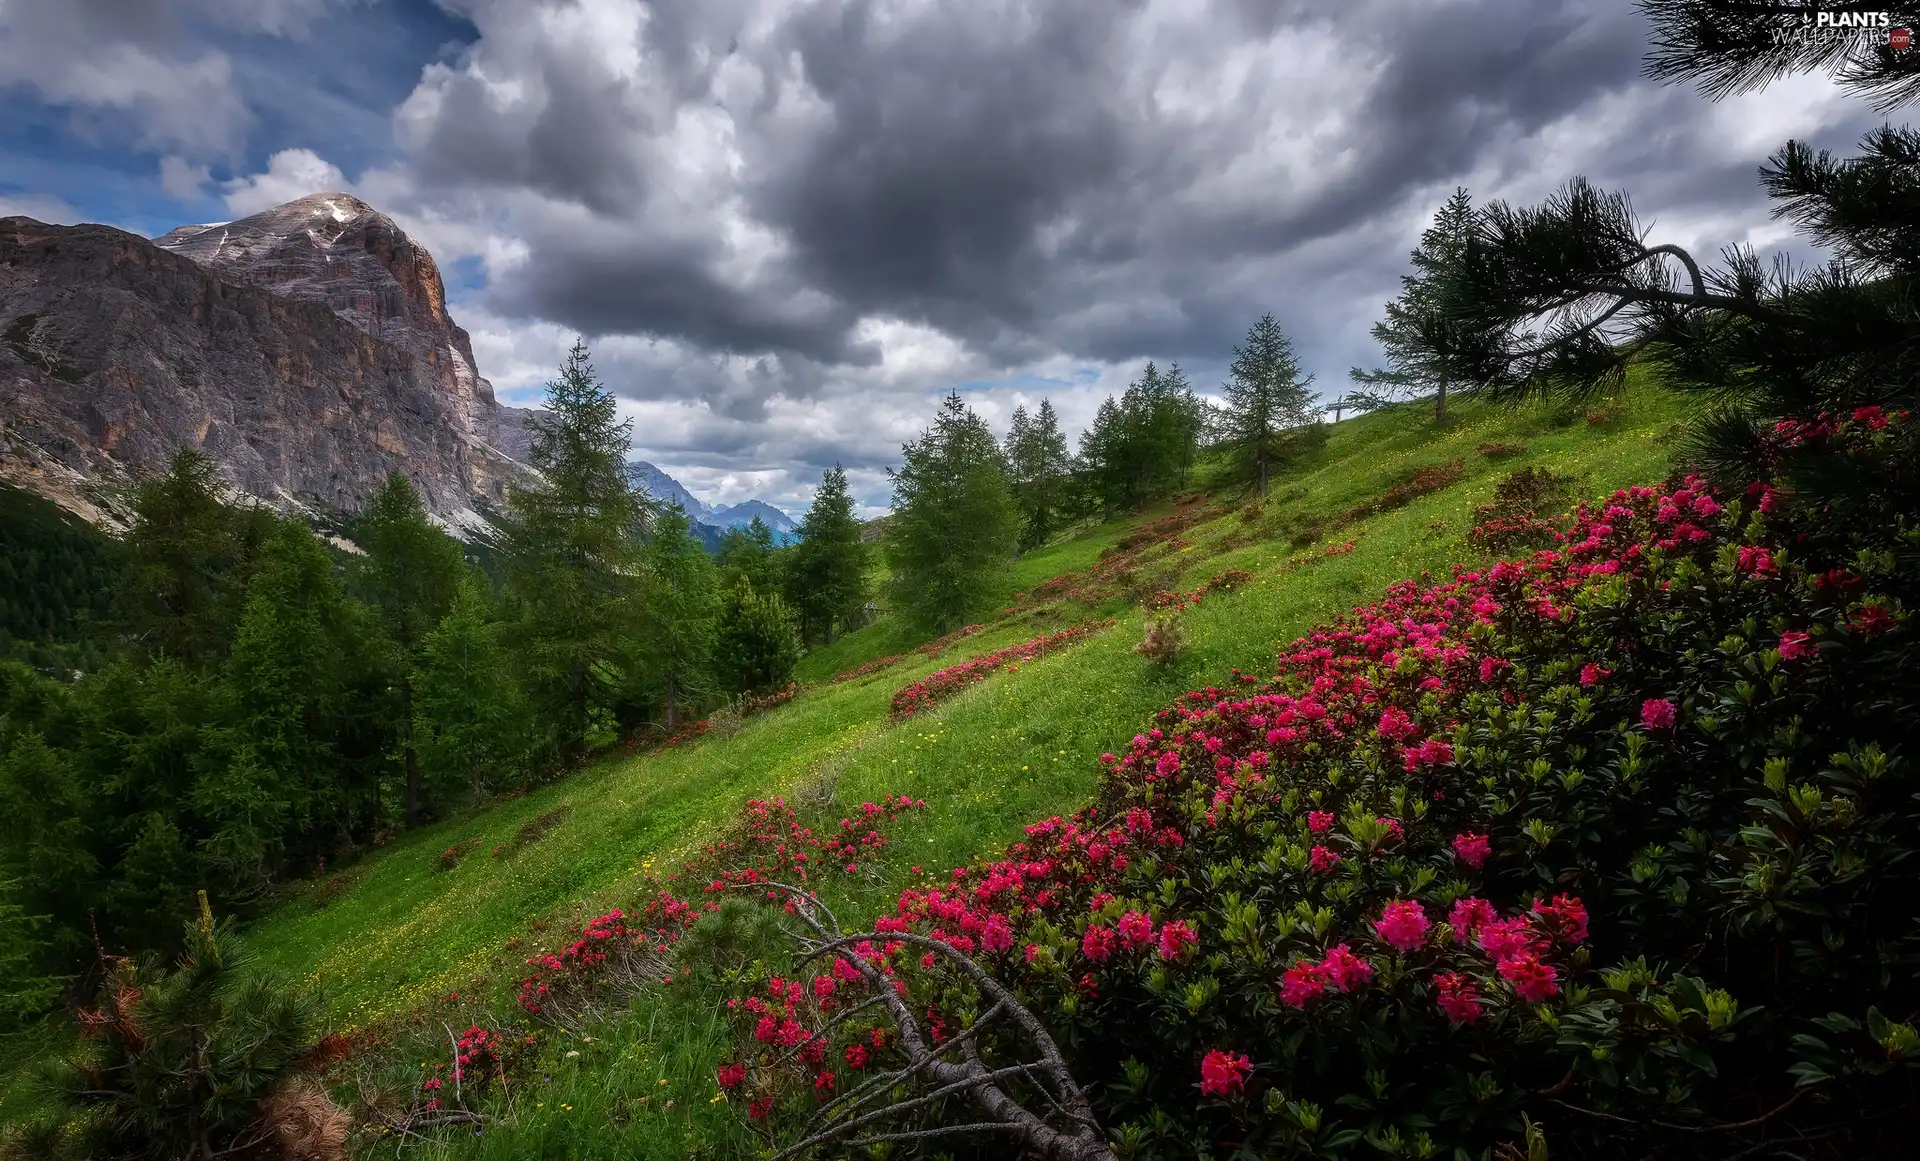 viewes, Mountains, dark, rhododendron, Falzarego Pass, Italy, Province of Belluno, trees, Dolomites, Hill, clouds